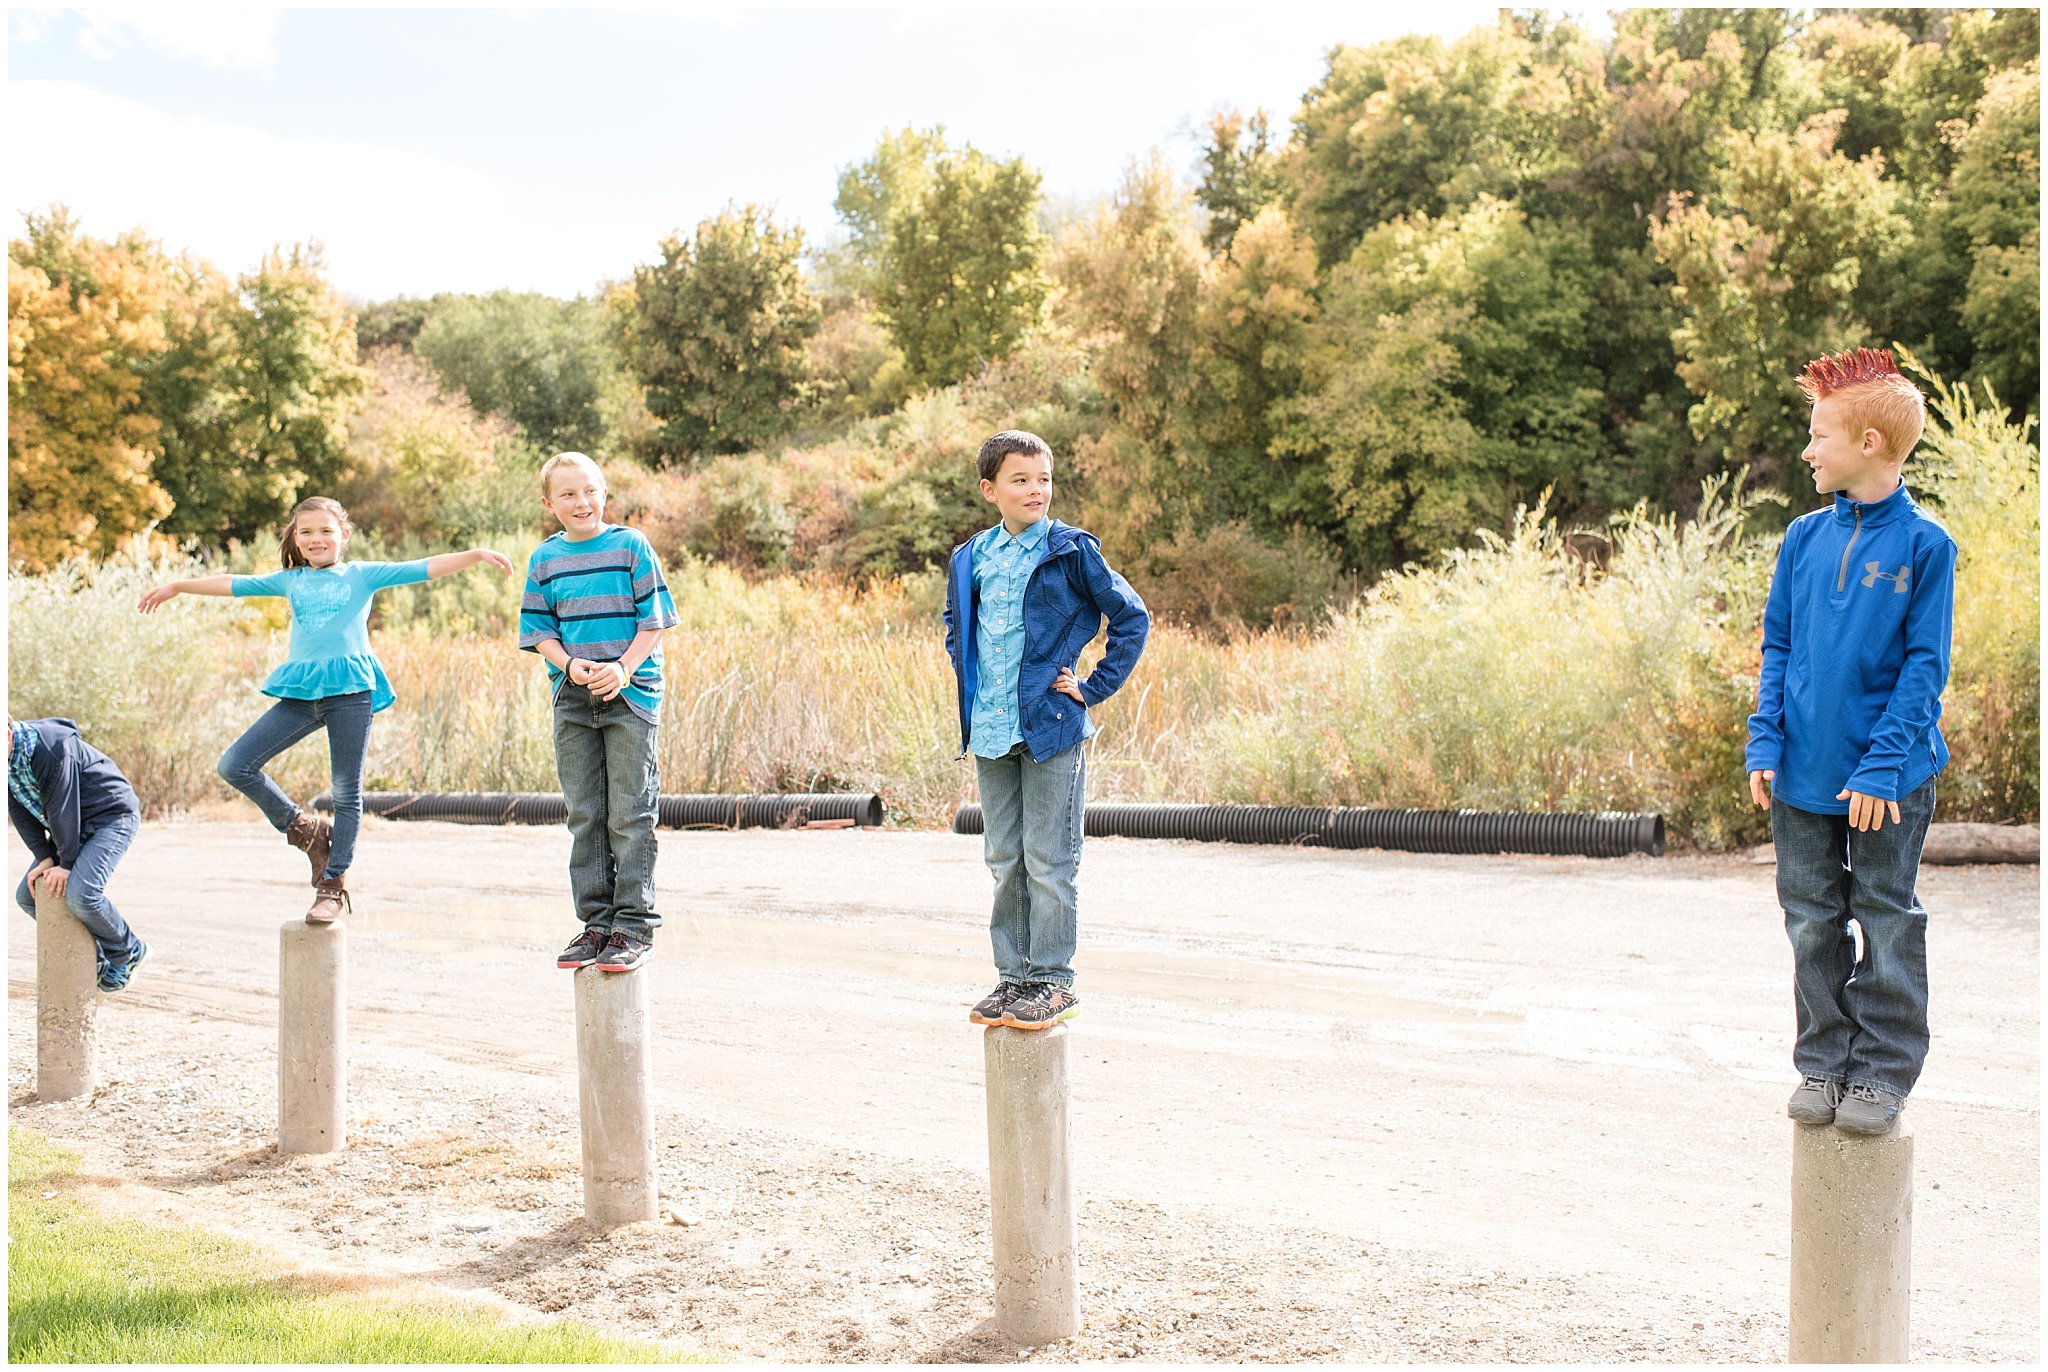 Kids standing on planks | Tremonton Family Pictures and Make a Wish Event | Jessie and Dallin Photography